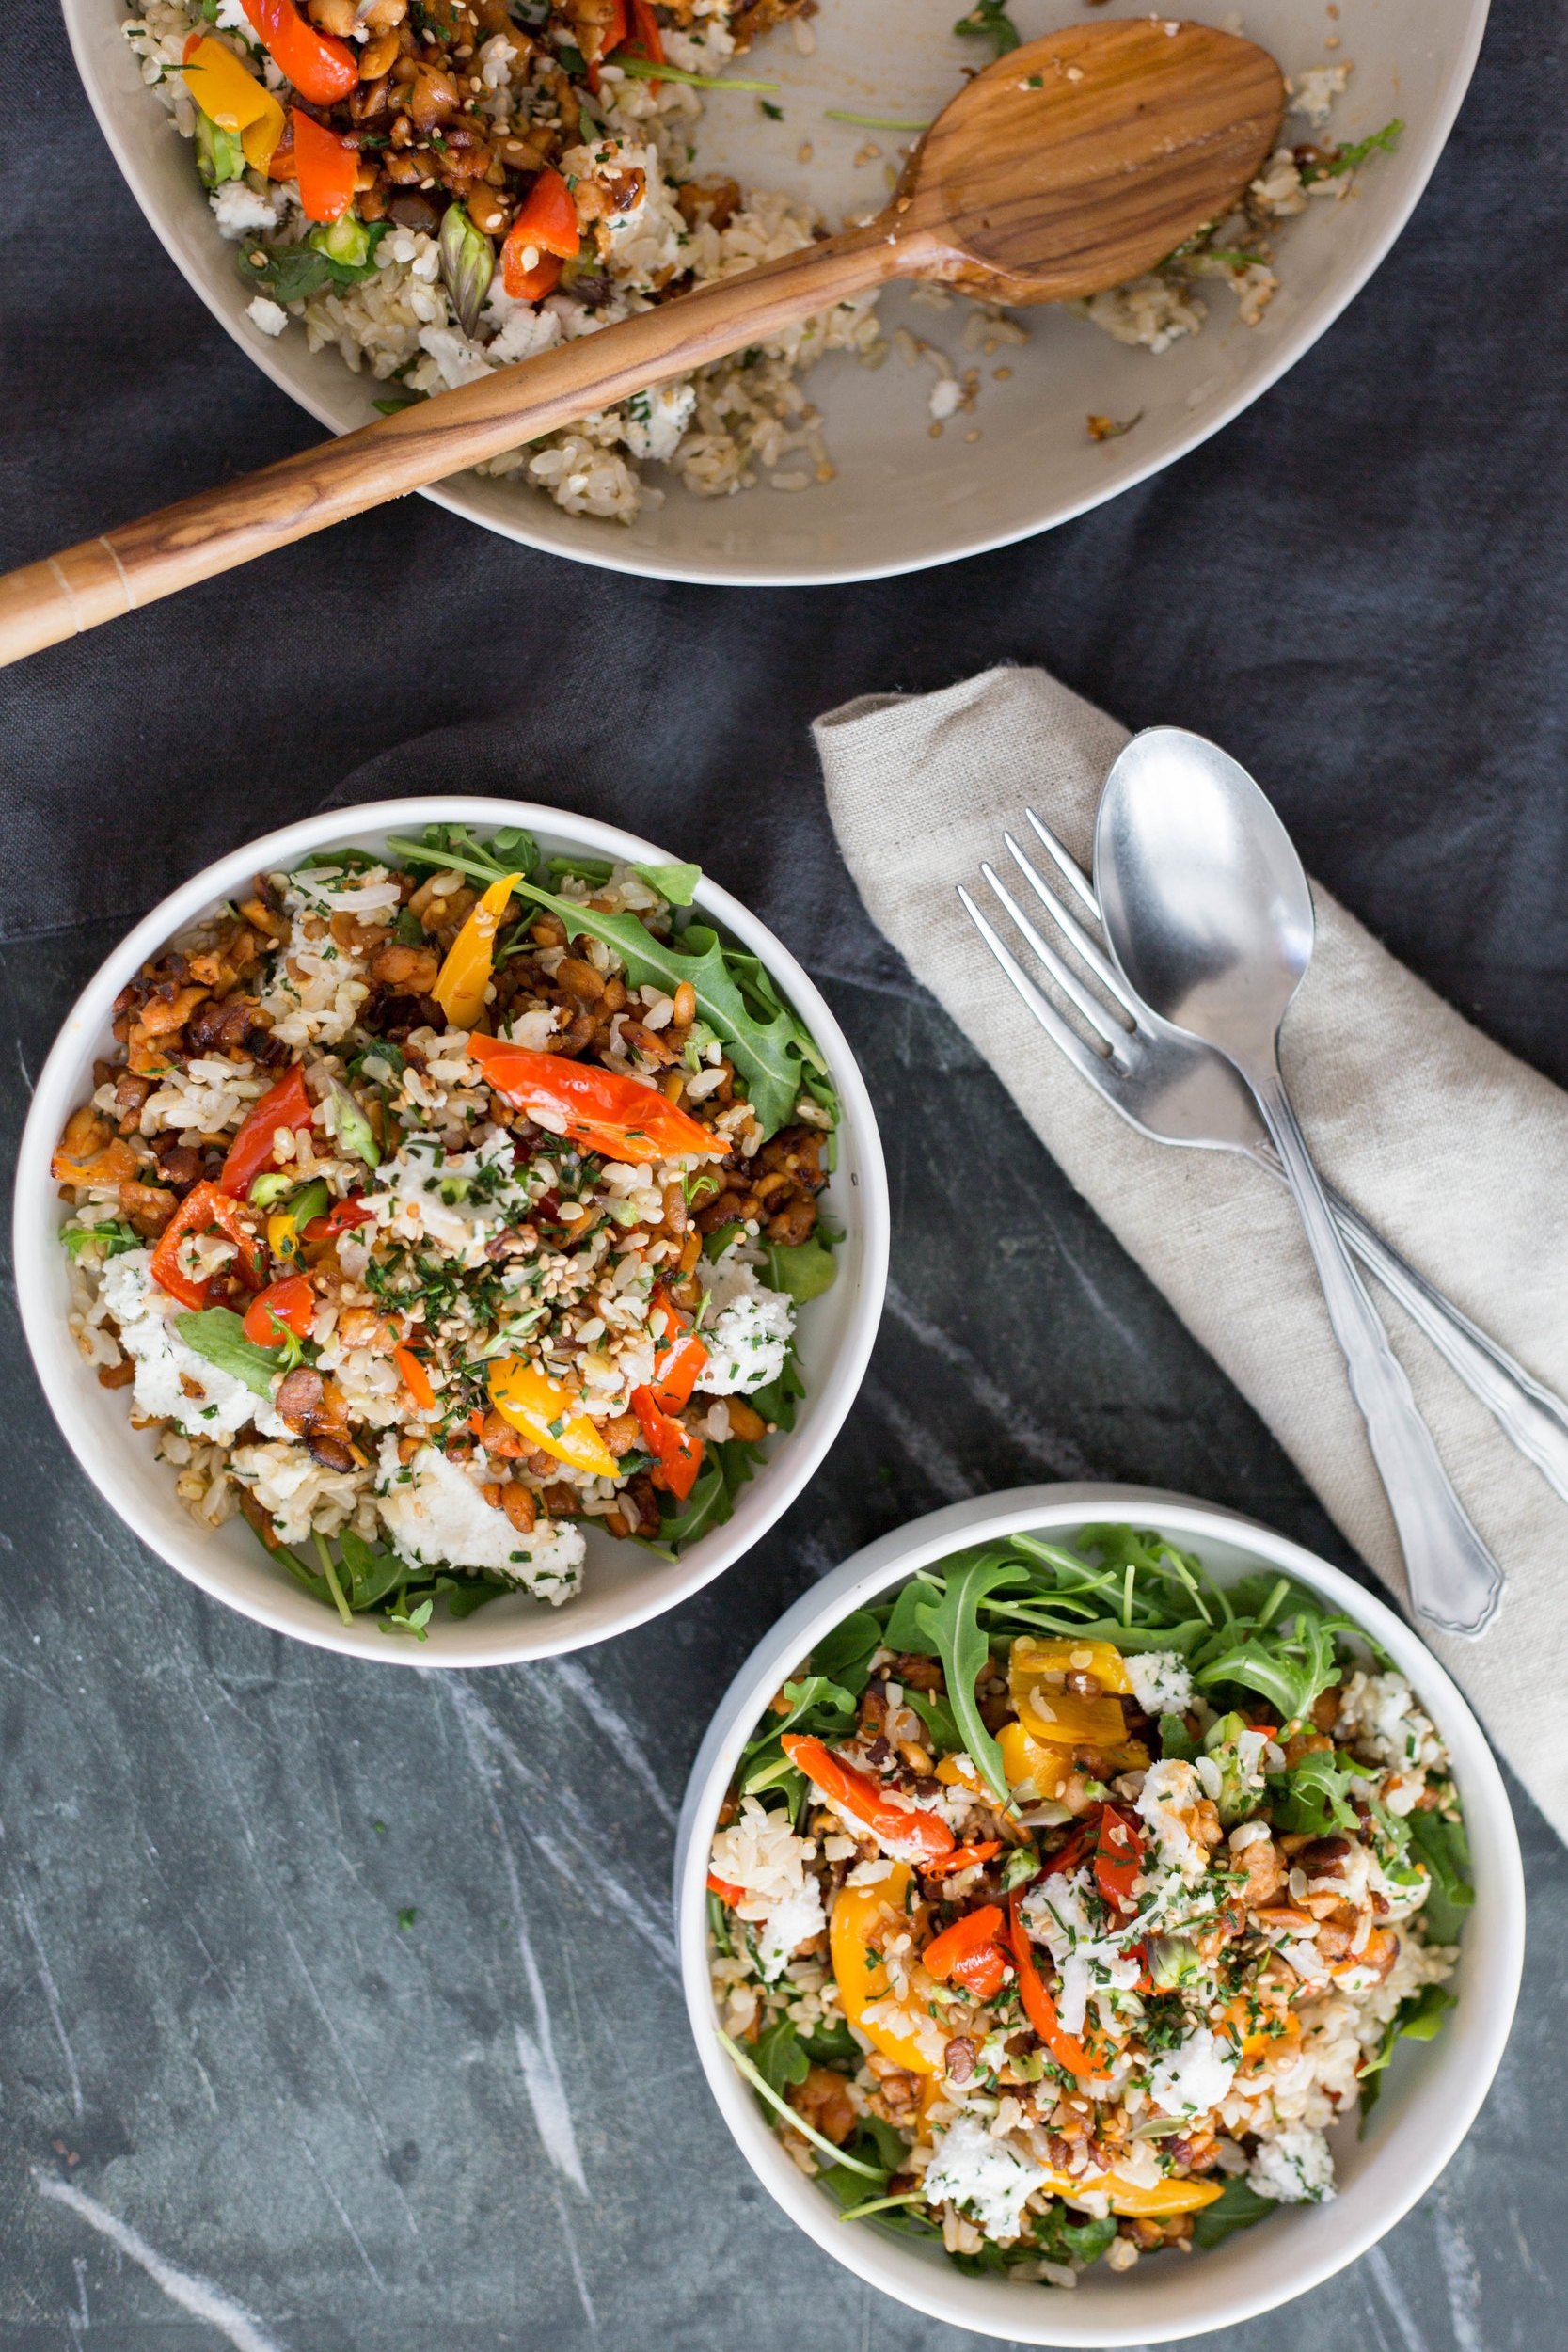 Recipe: Crumbled Tempeh Salad with arugula rice topped with herbed vegan ricotta cheese | #plantbased #glutenfree #puremamas | @JuliNovotny